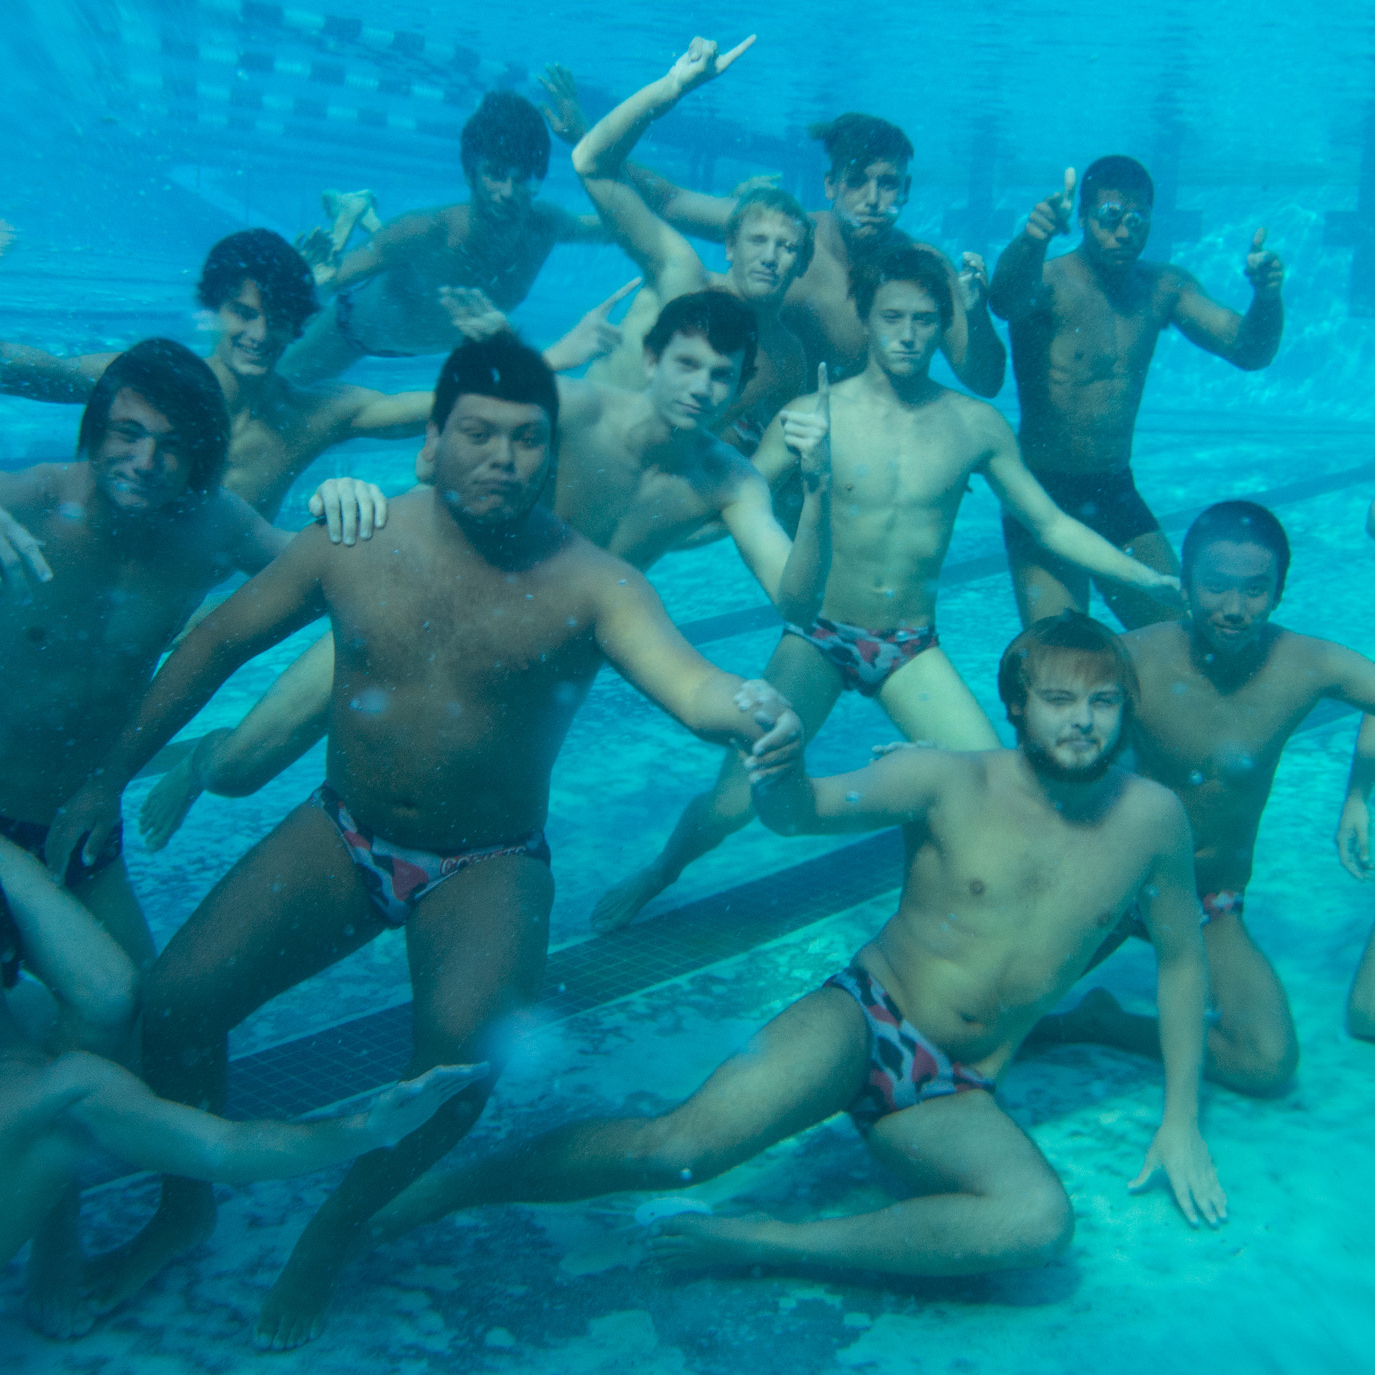 A team of male Palomar water polo players pose underwater at the pool in Speedos.